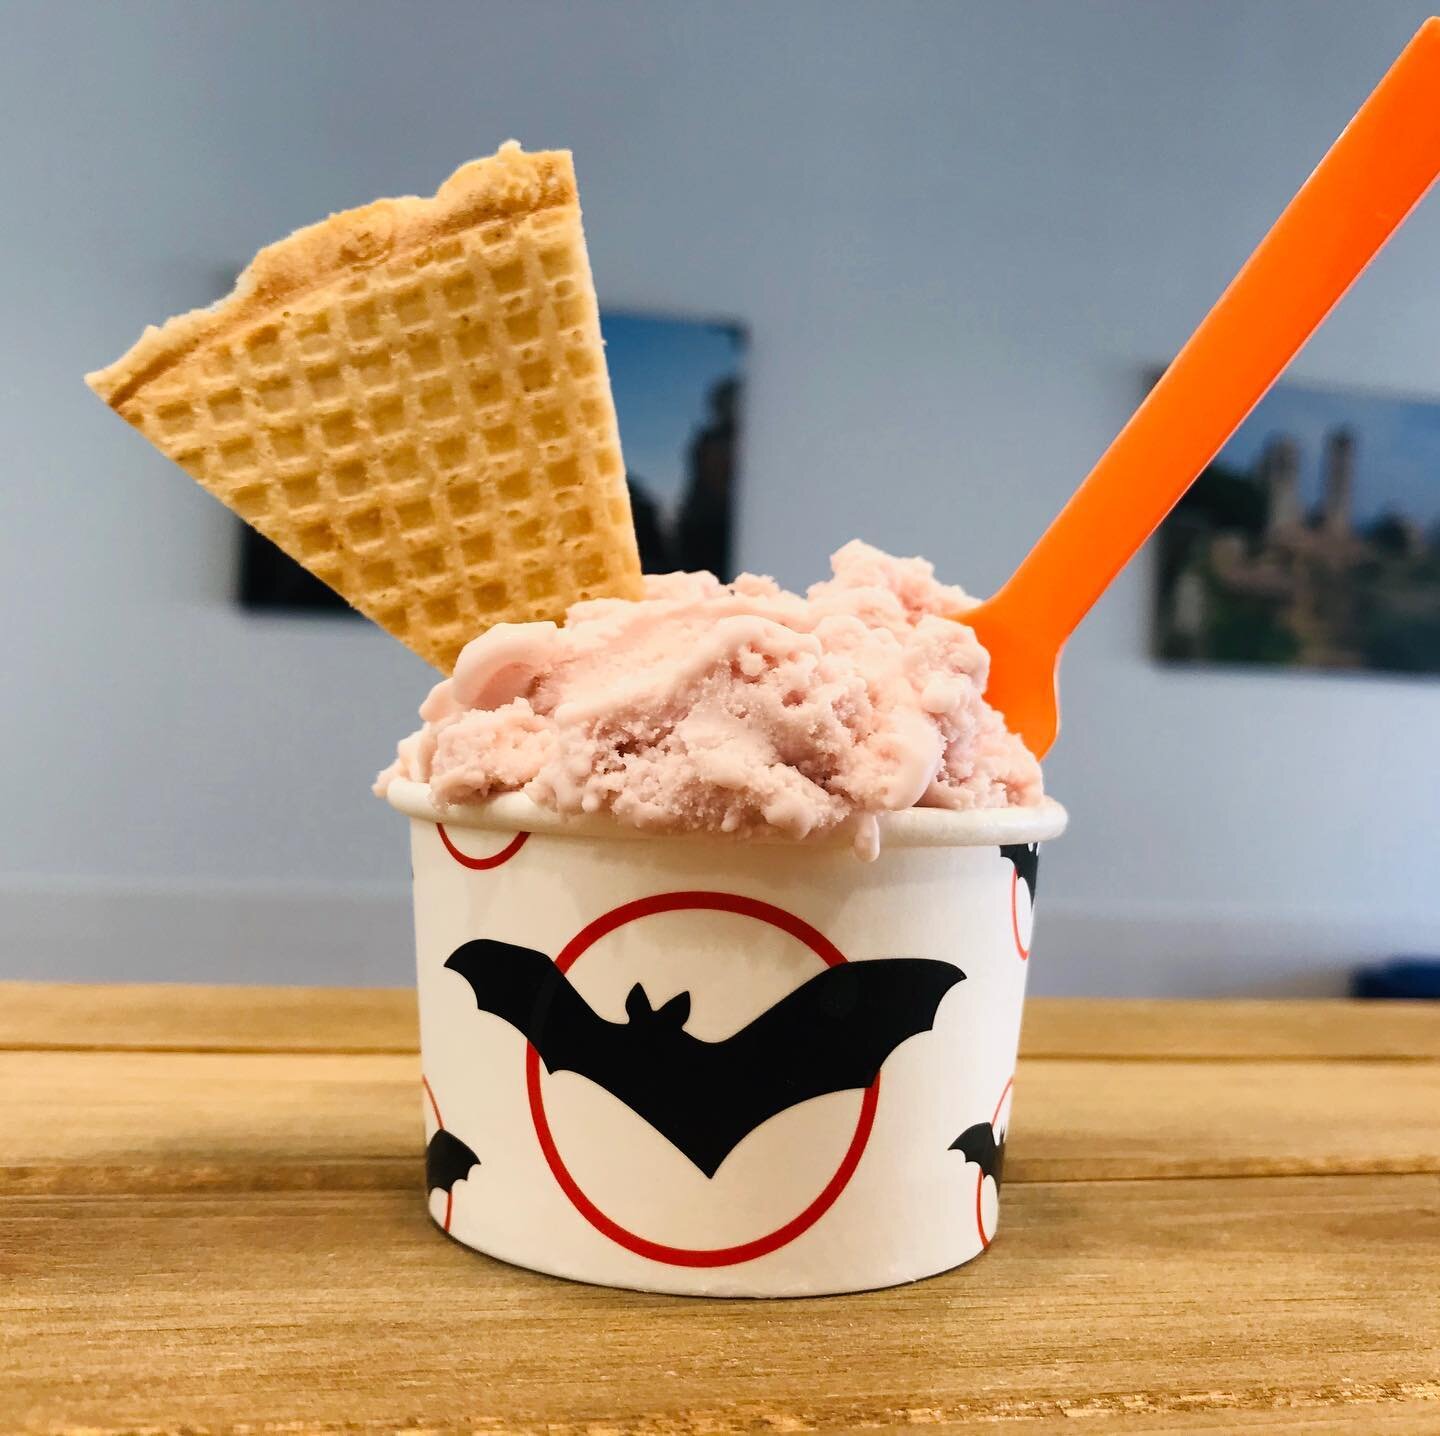 RASPBERRY MASCARPONE is a customer requested lab flavor this week! And, we have fresh peaches (from GA) in our peach gelato and sorbetto flavors. Fredericksburg peaches will be featured soon! It&rsquo;s hot outside - you need gelato!!